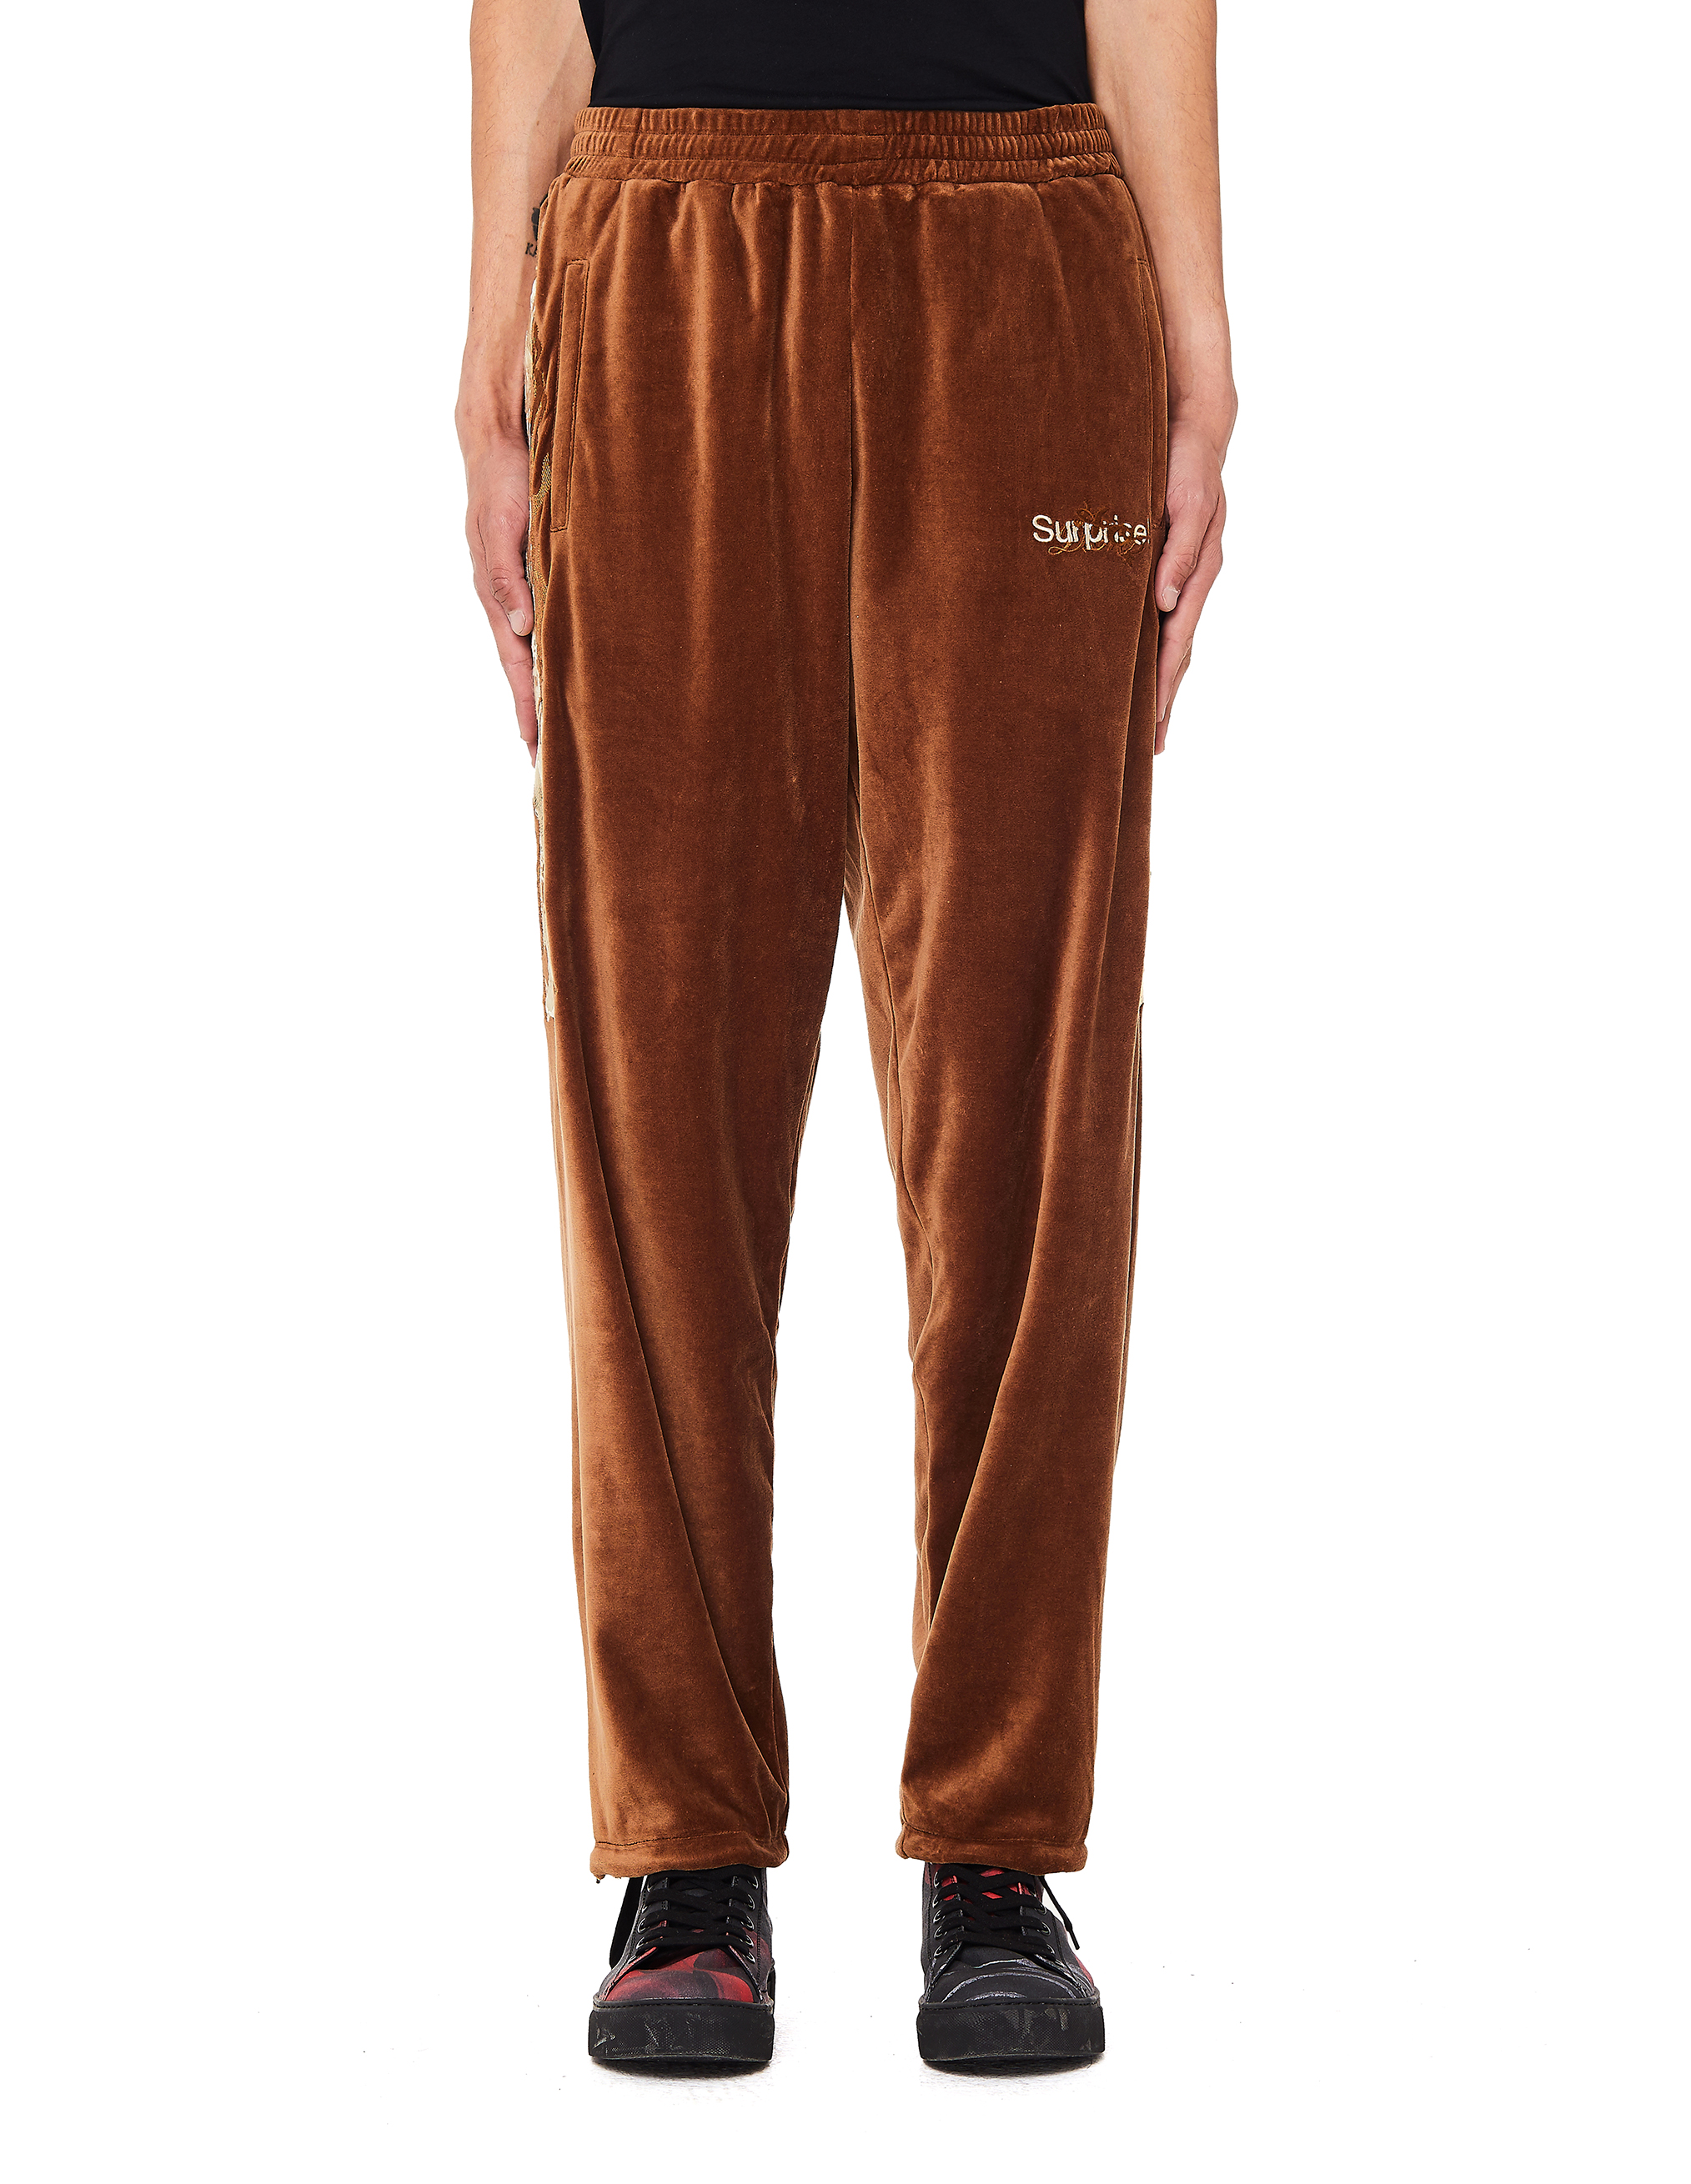 Doublet | Brown Embroidered Velour Sweatpants | SVMOSCOW.COM